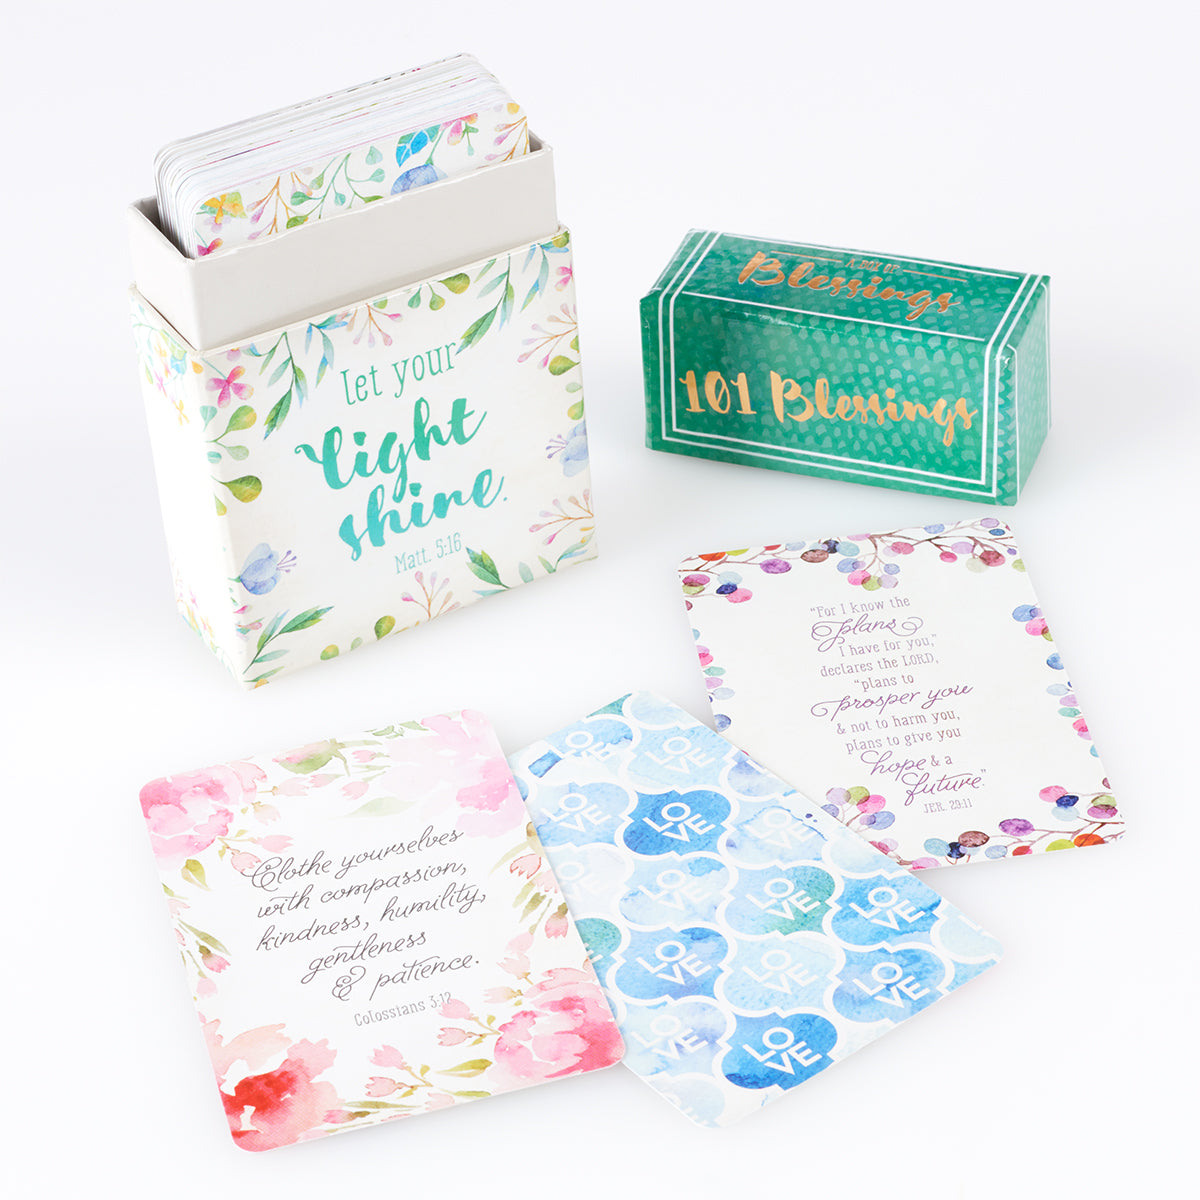 Let Your Light Shine Box of 101 Blessings - The Christian Gift Company